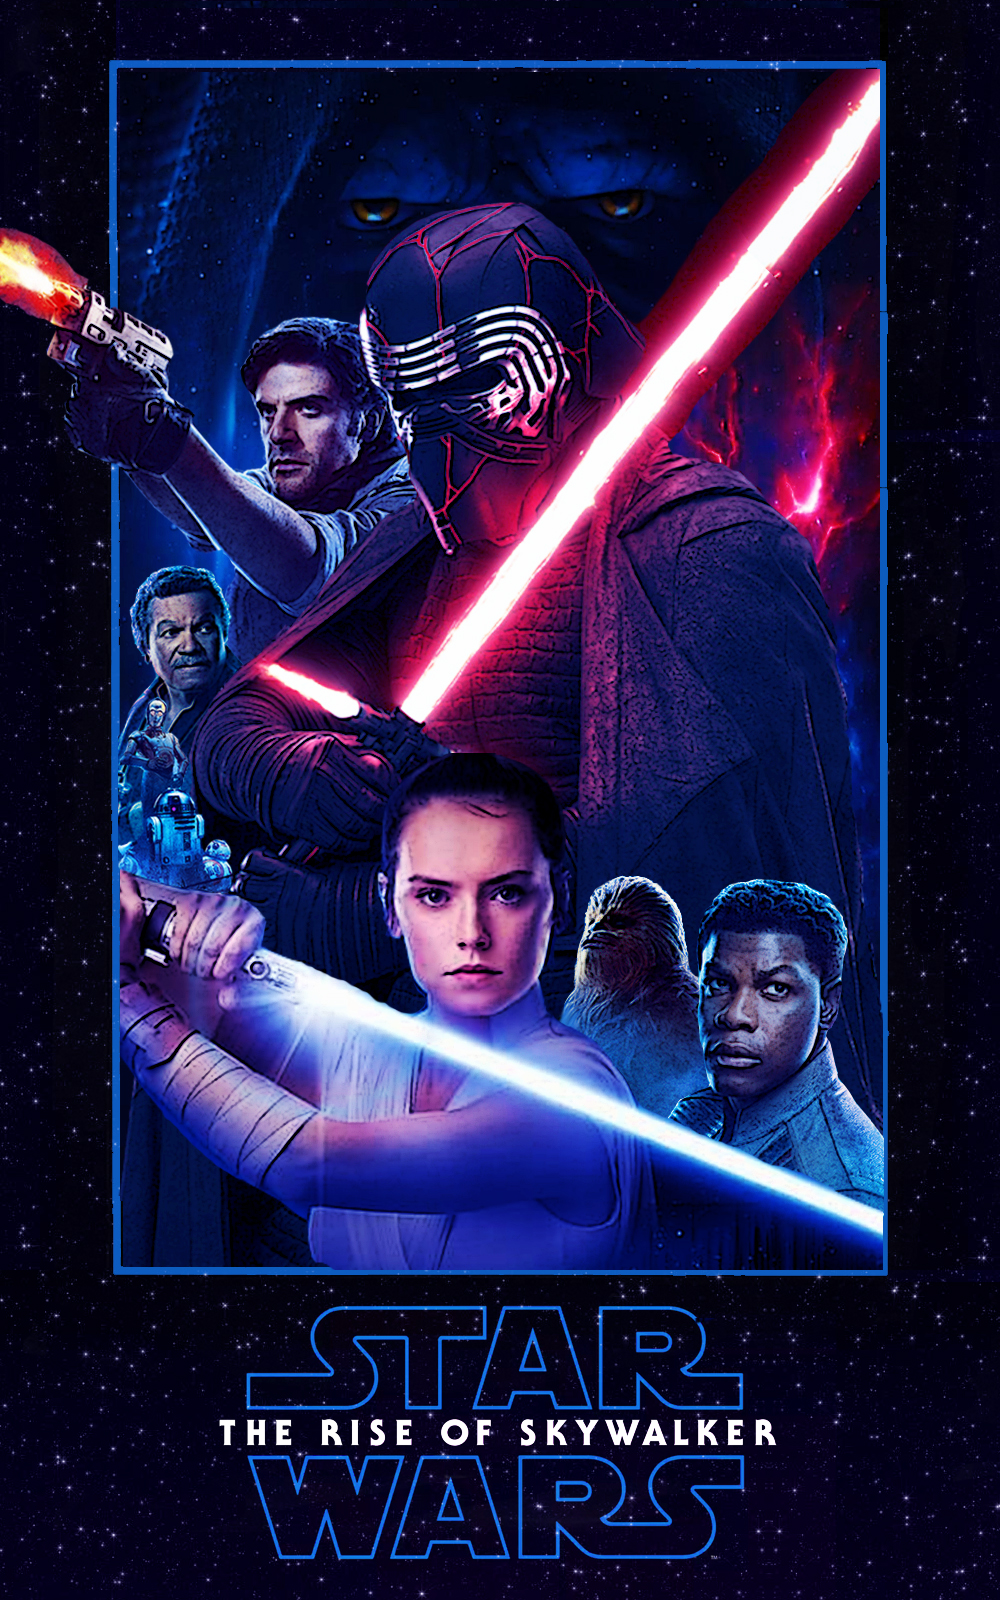 Pin by 7th Art 🎬 on STAR WARS (Film Series) Movie Posters  Star wars  poster, Star wars images, Star wars movies posters